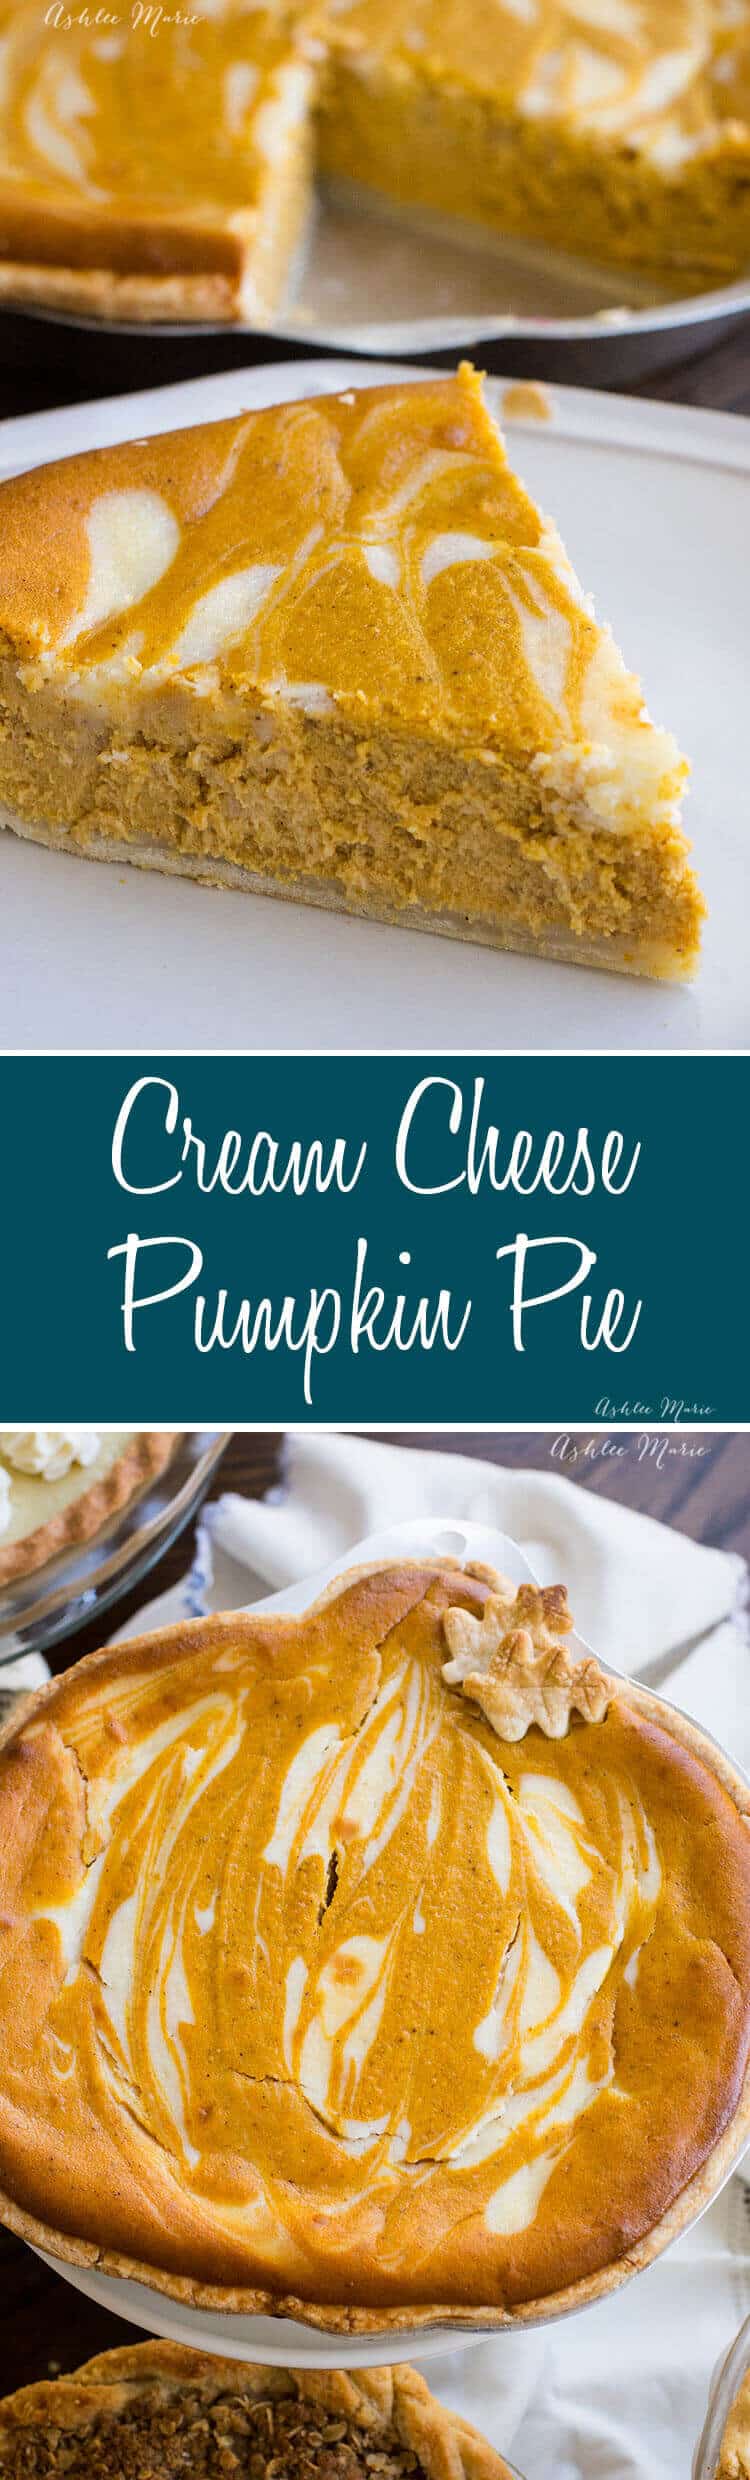 this pie has the flavor of a classic pumpkin pie but with an incredible texture as well as a pretty surface! This pie is always a huge hit